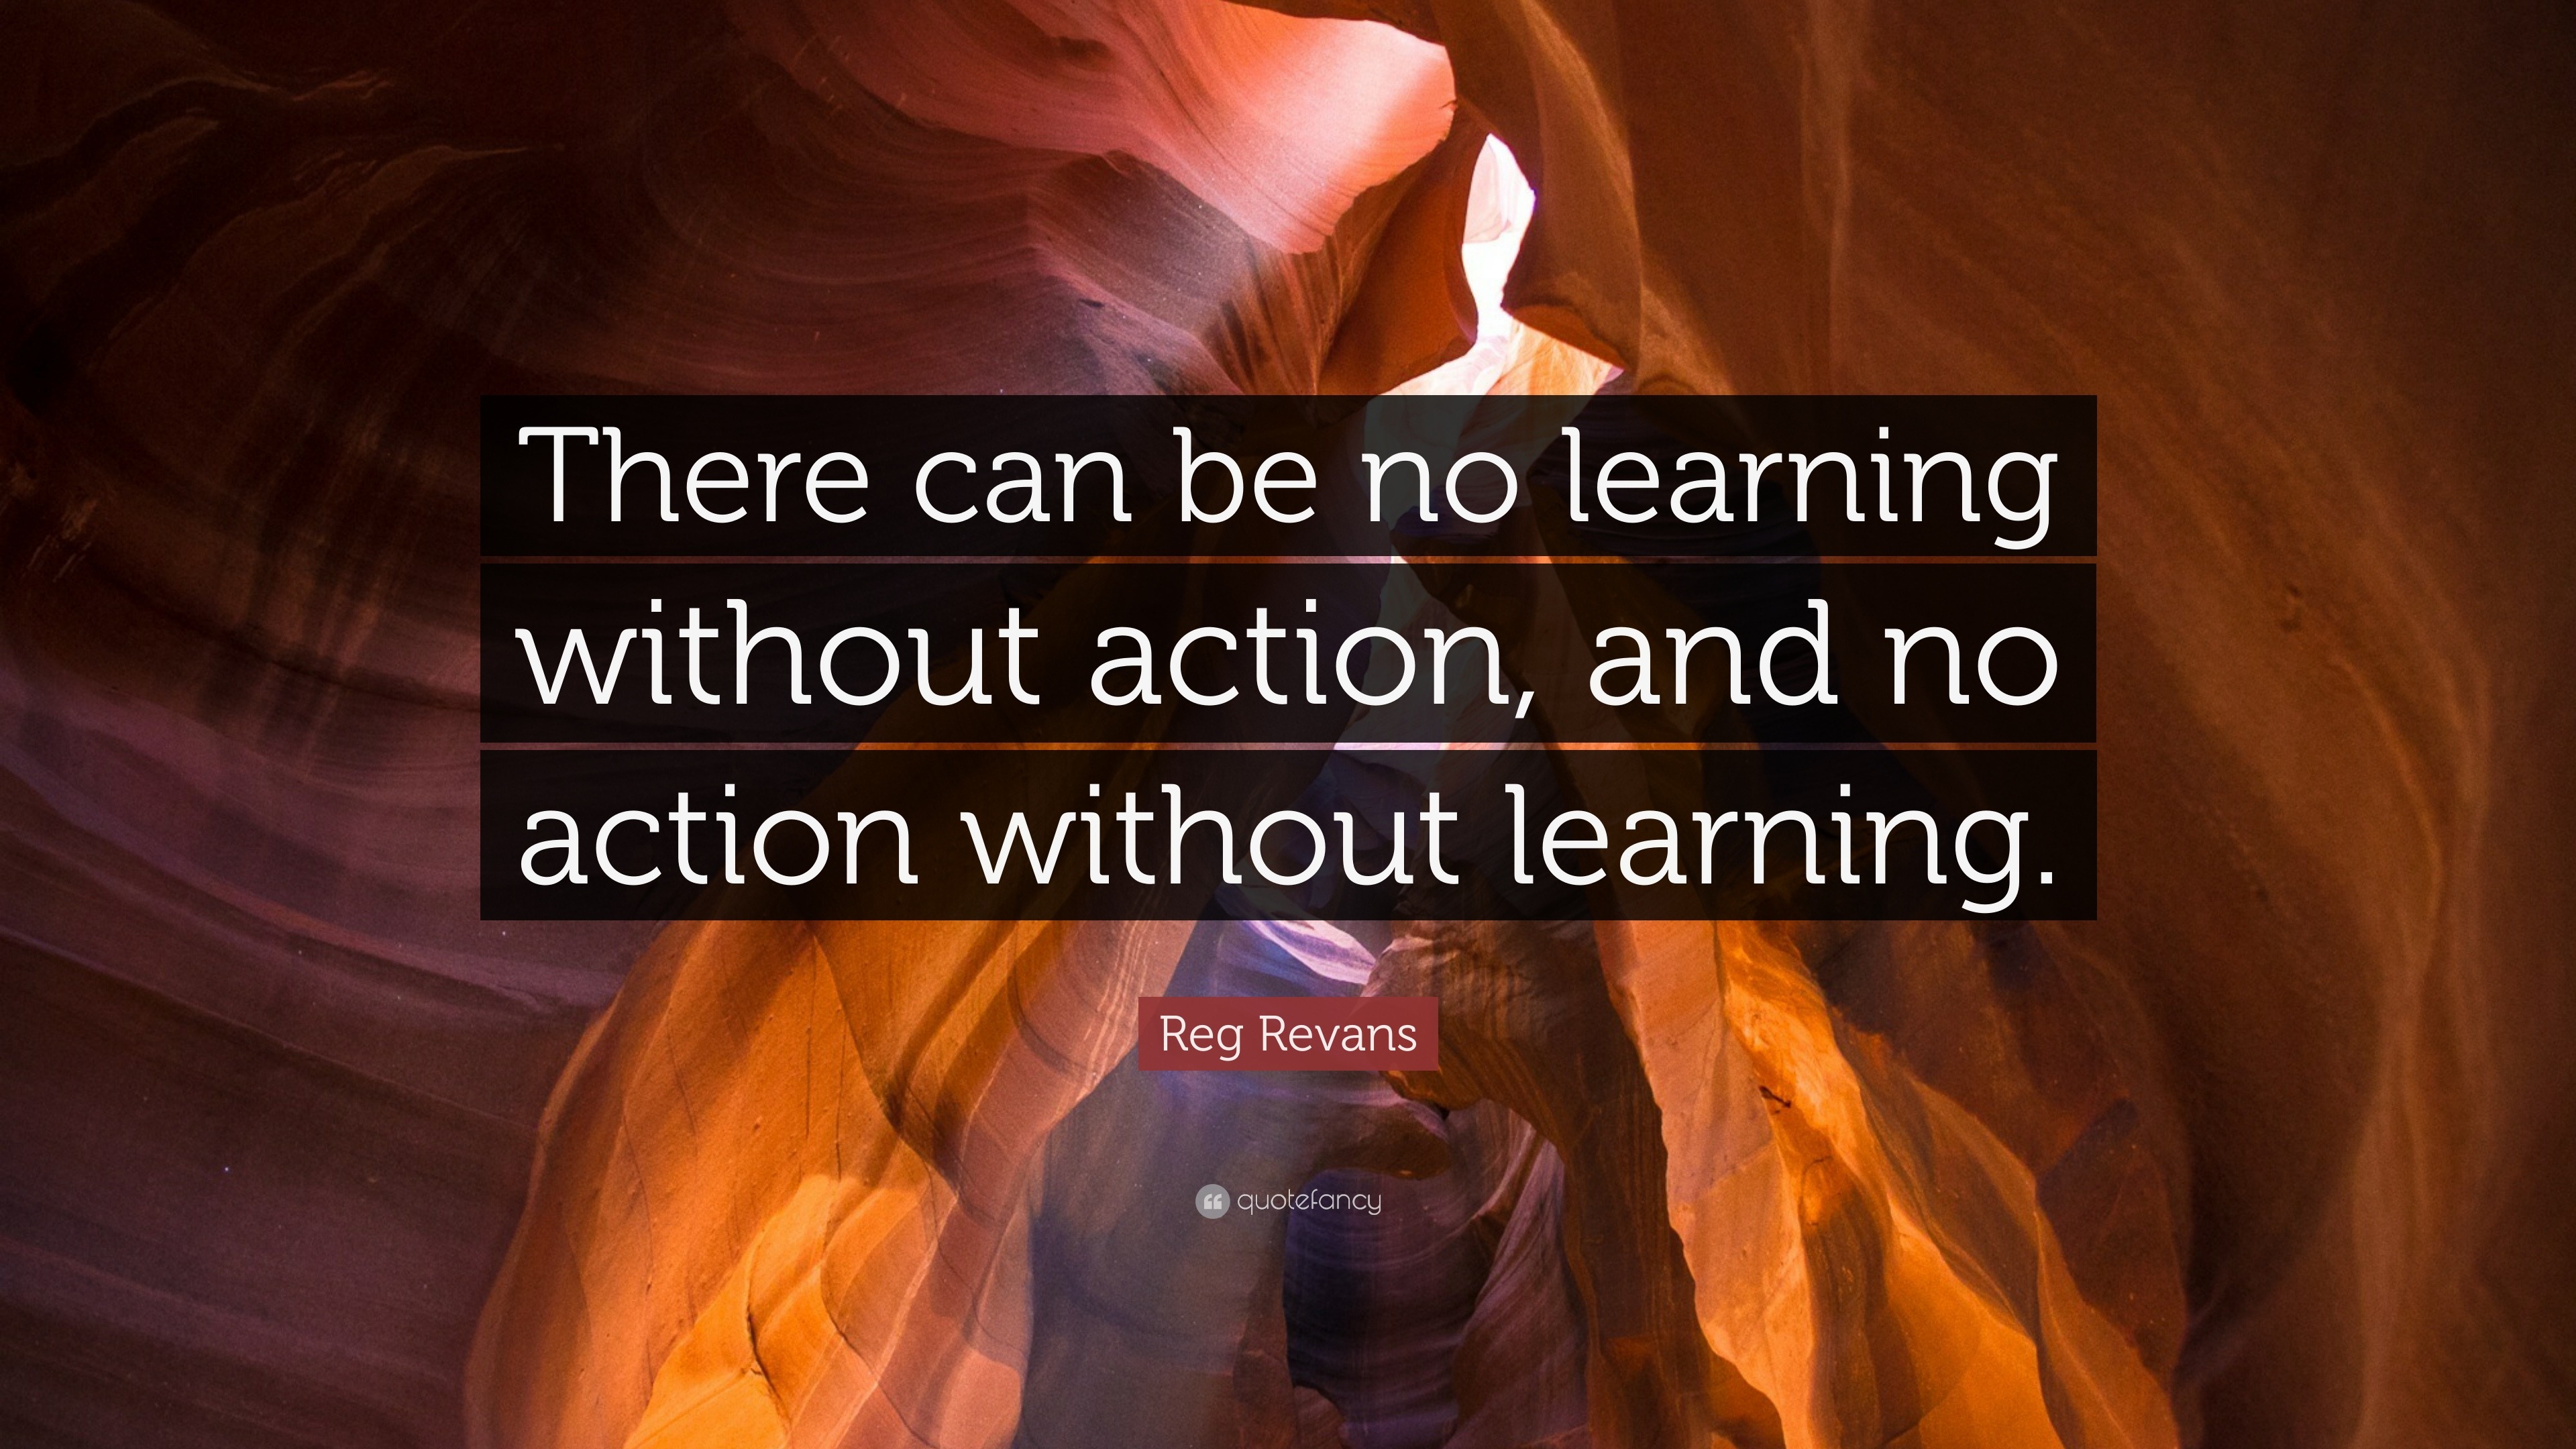 Reg Revans Quote: "There can be no learning without action, and no action without learning." (12 ...